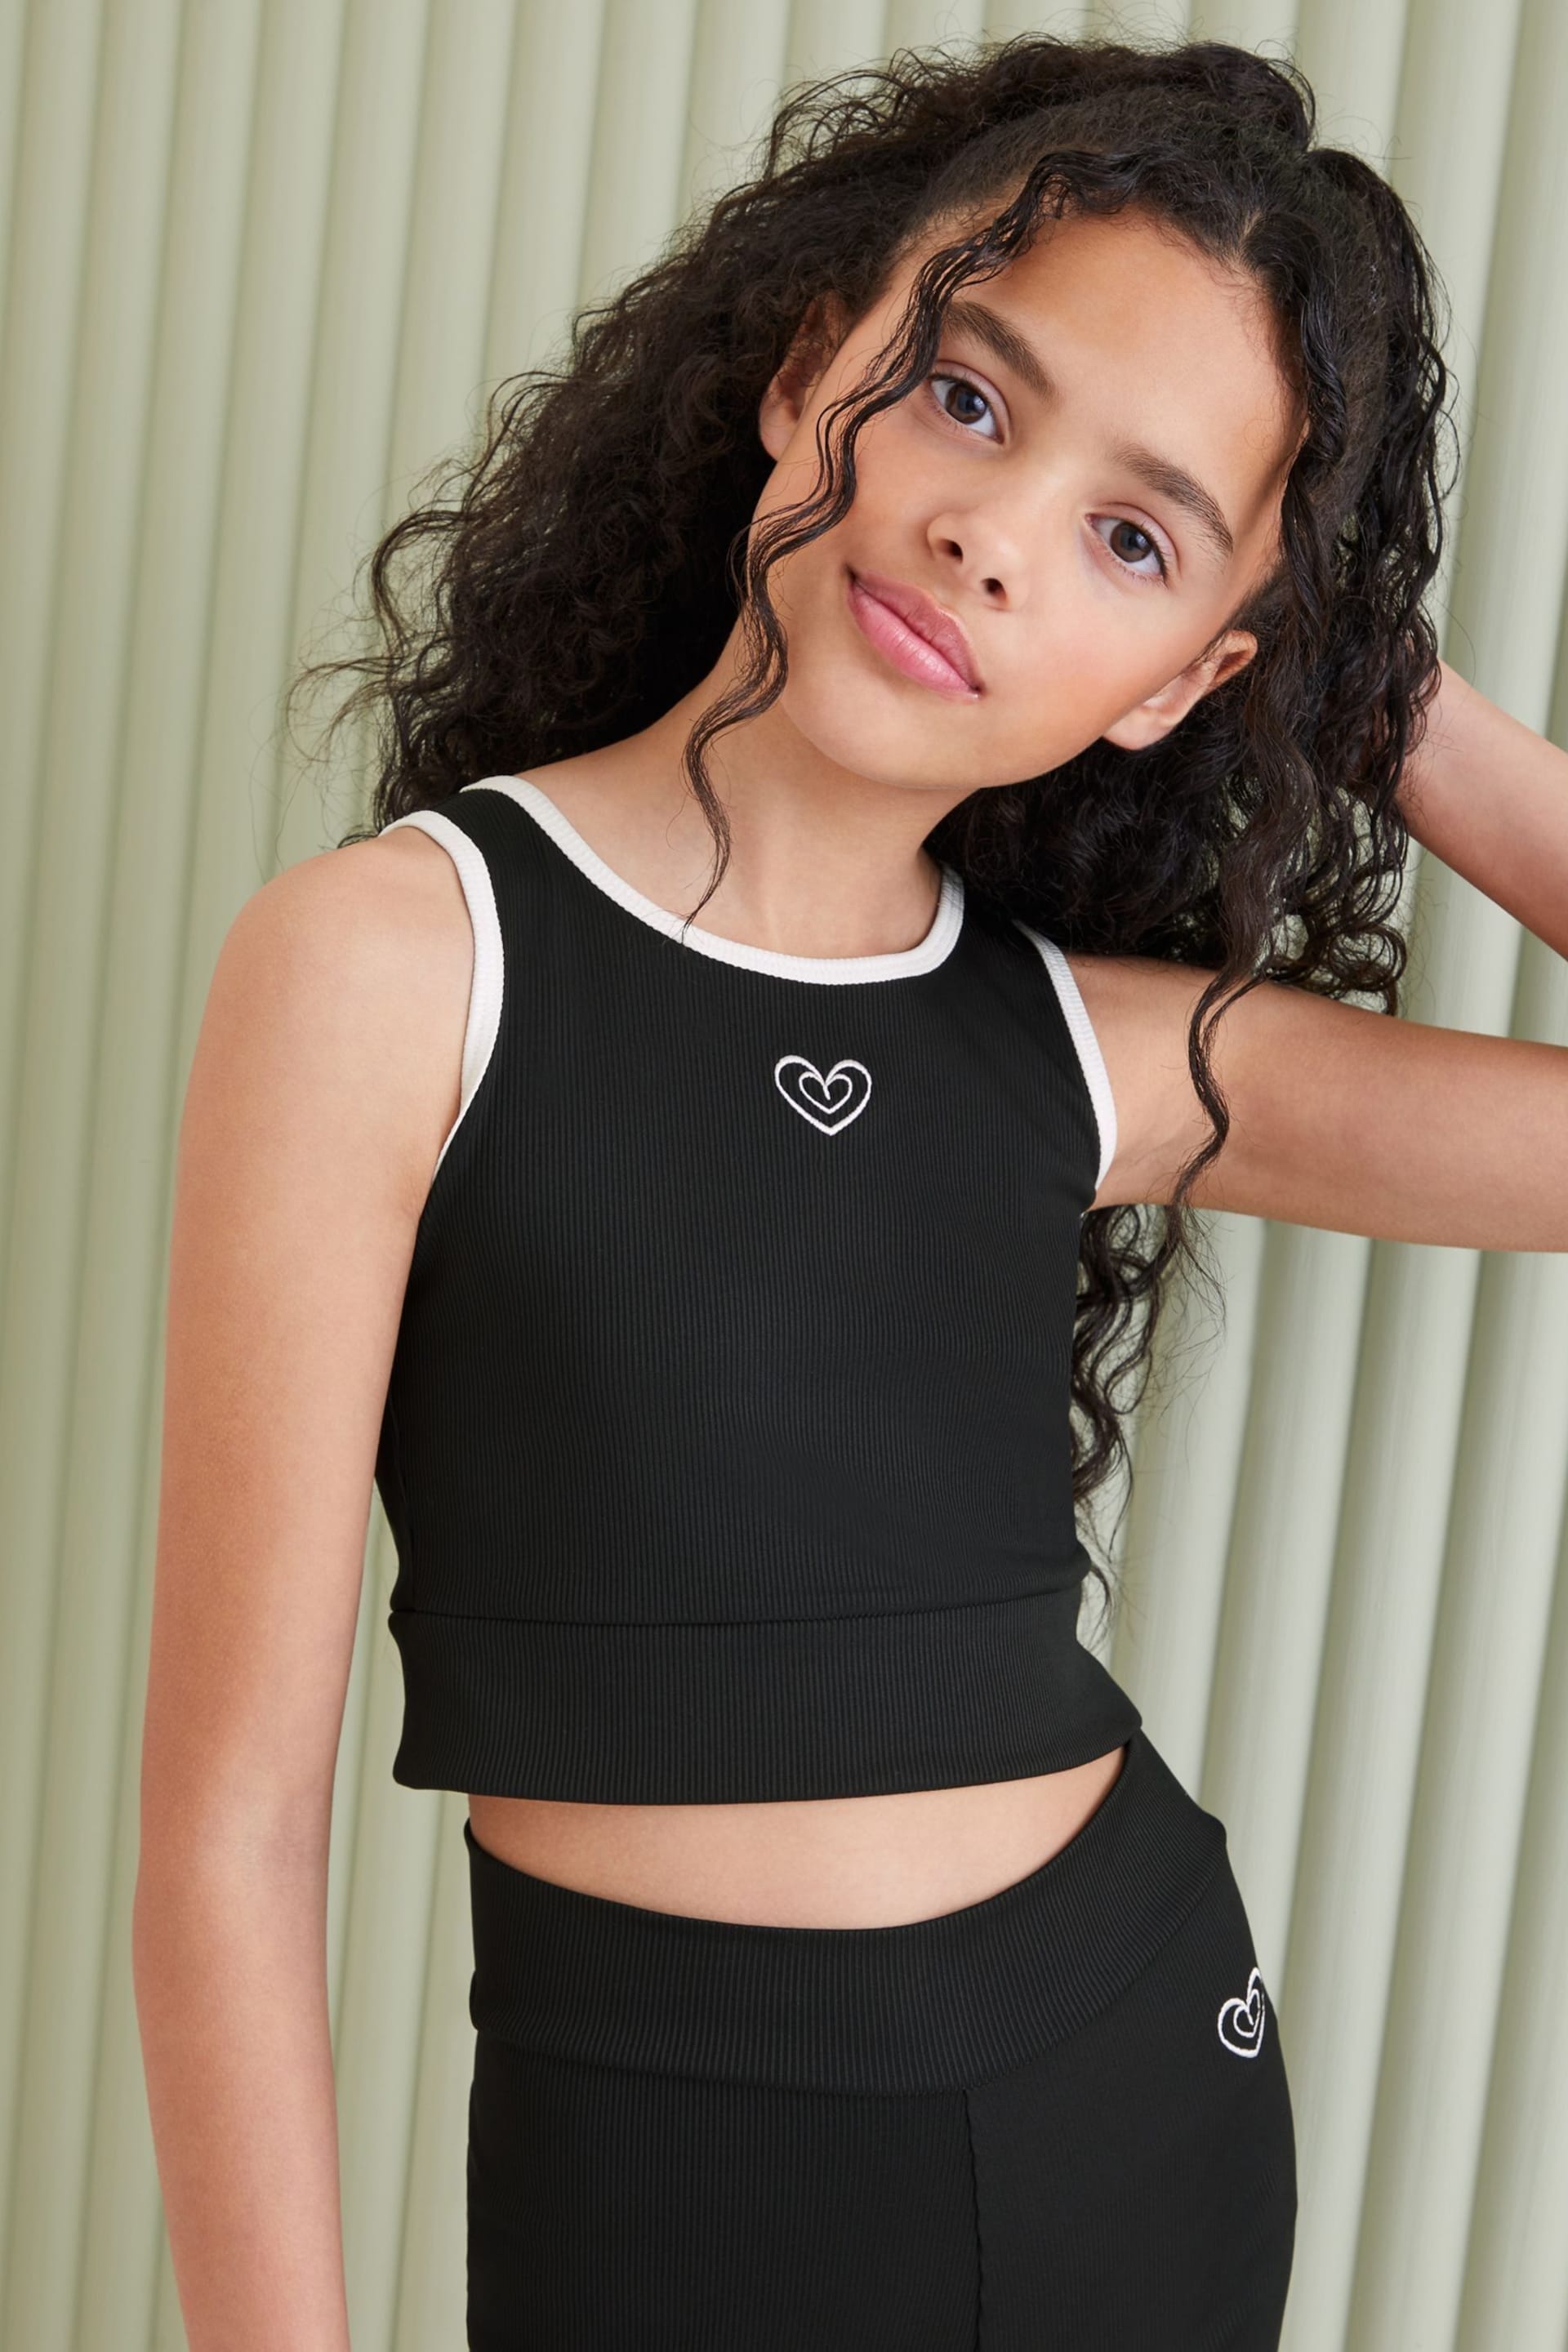 Lipsy Black/White Sleeveless Active Crop Top - Image 1 of 4